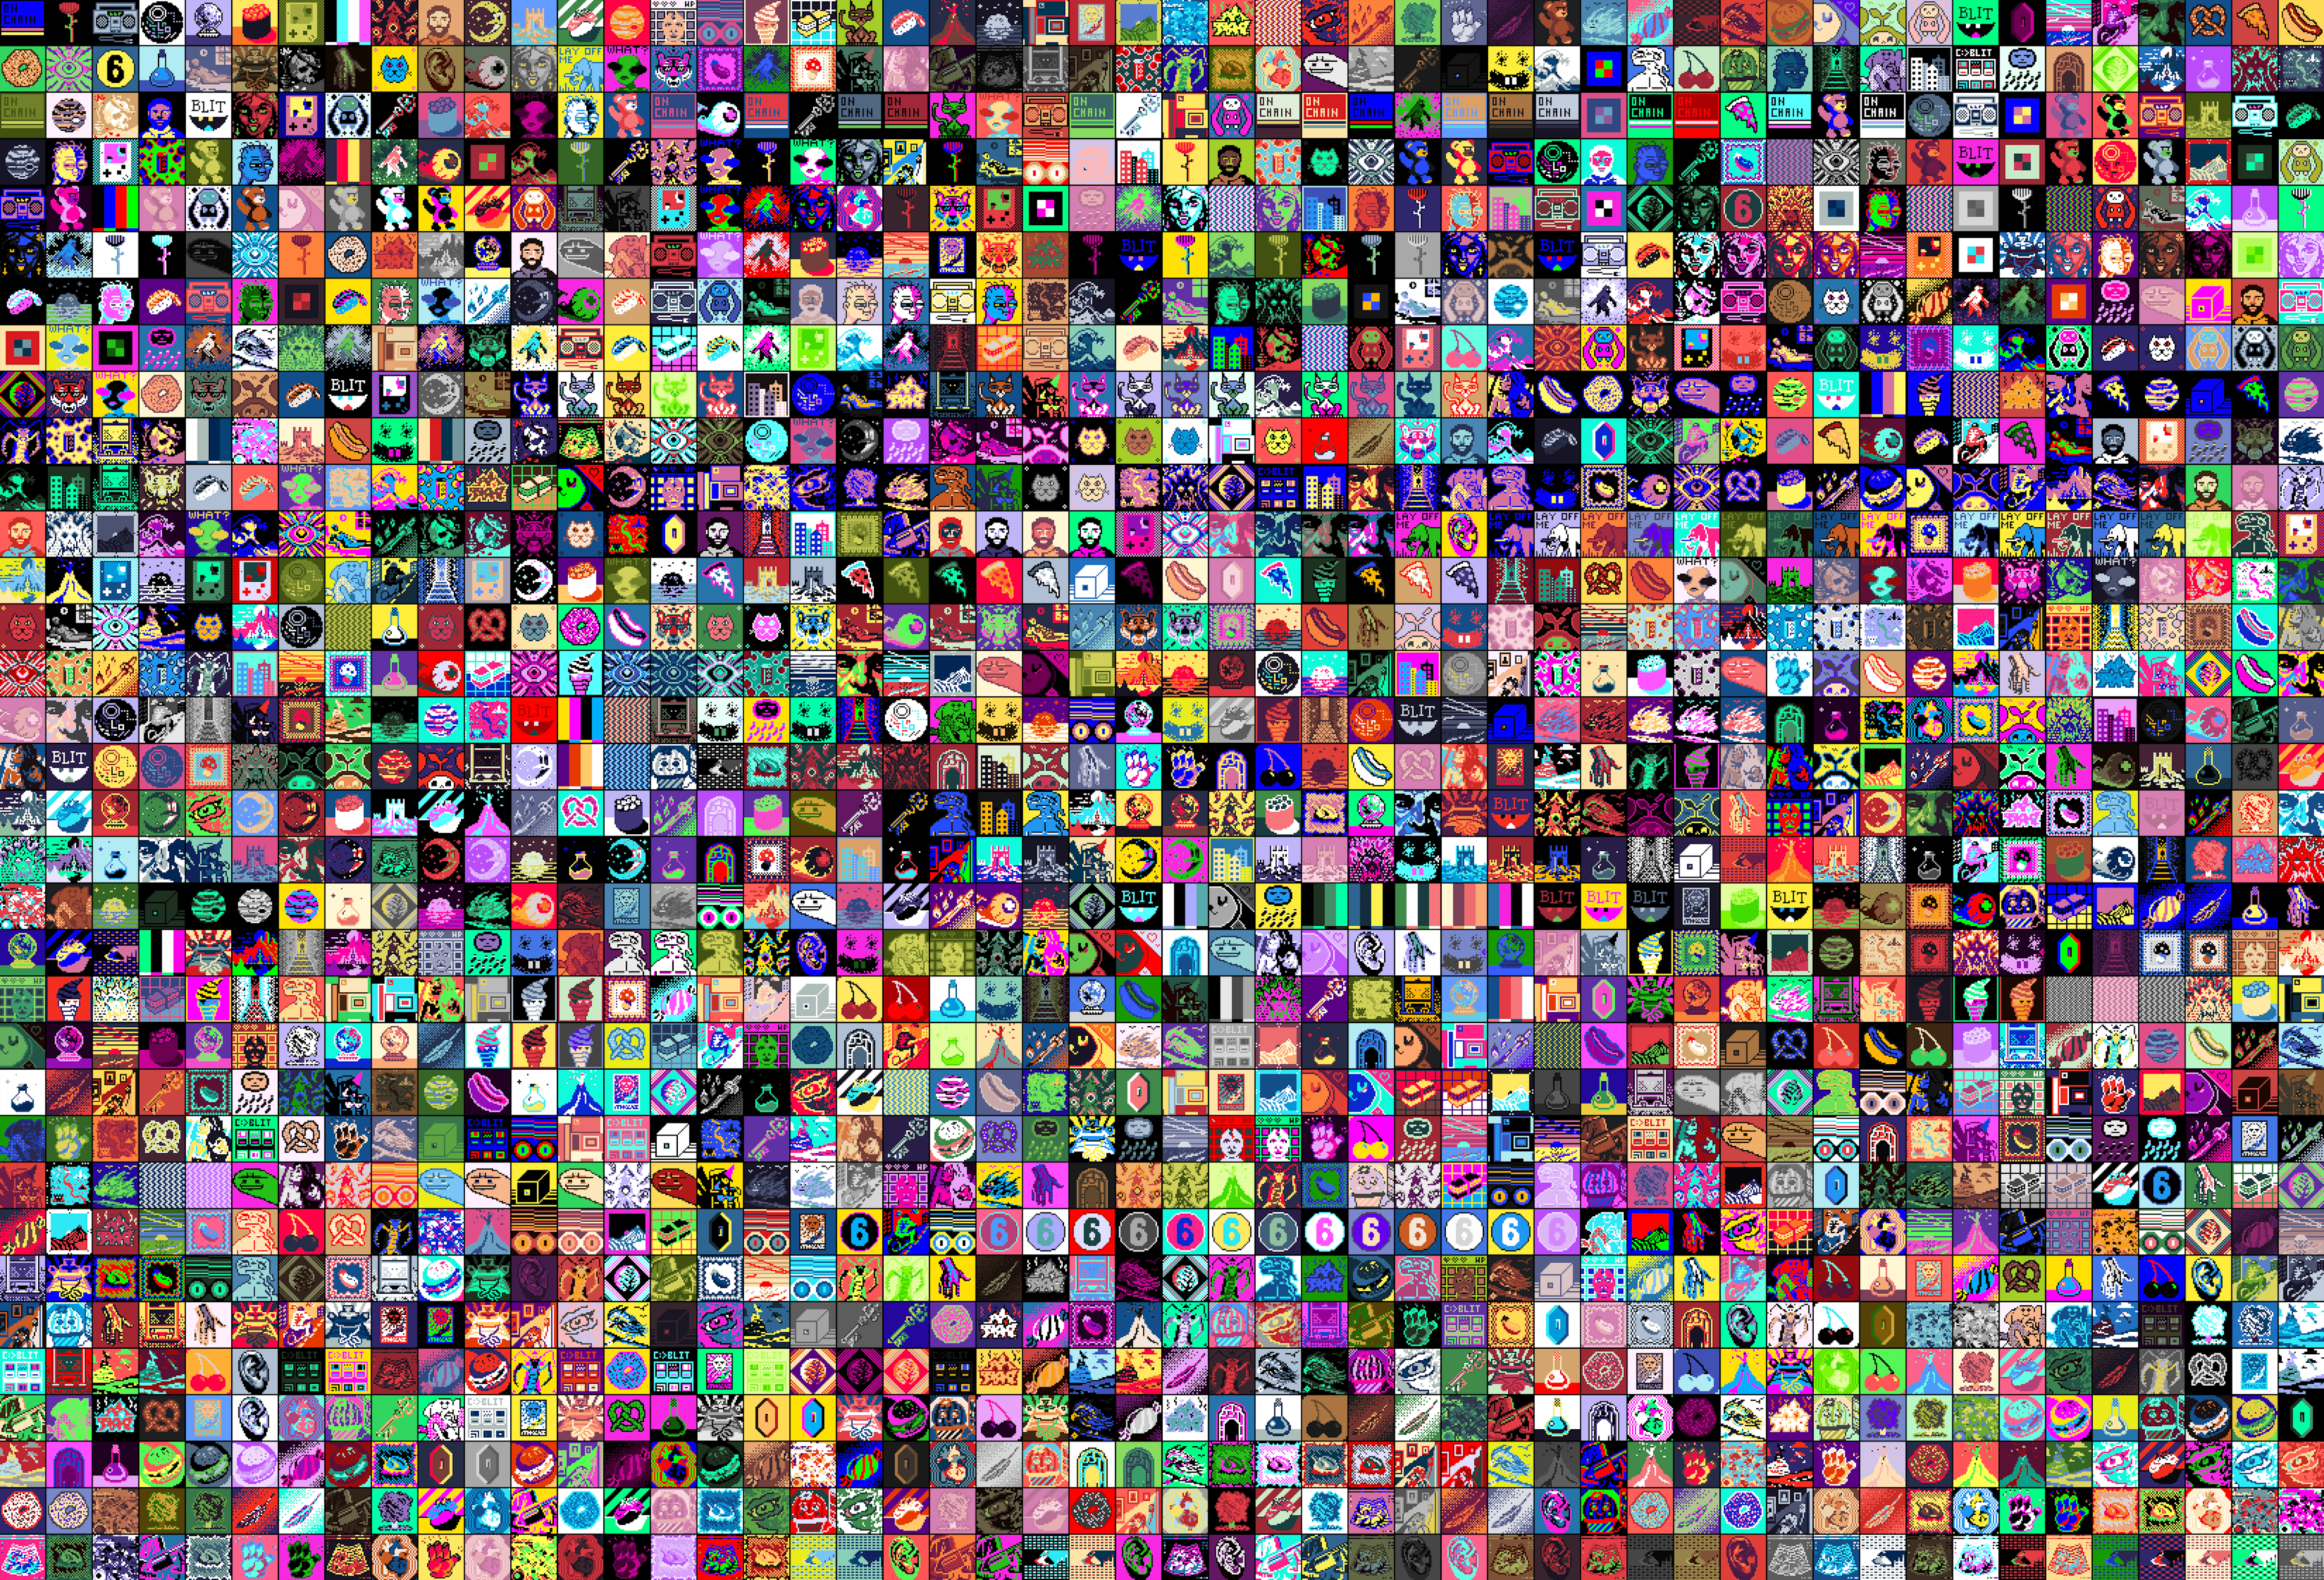 The collection of all 1,700 Blitmaps.